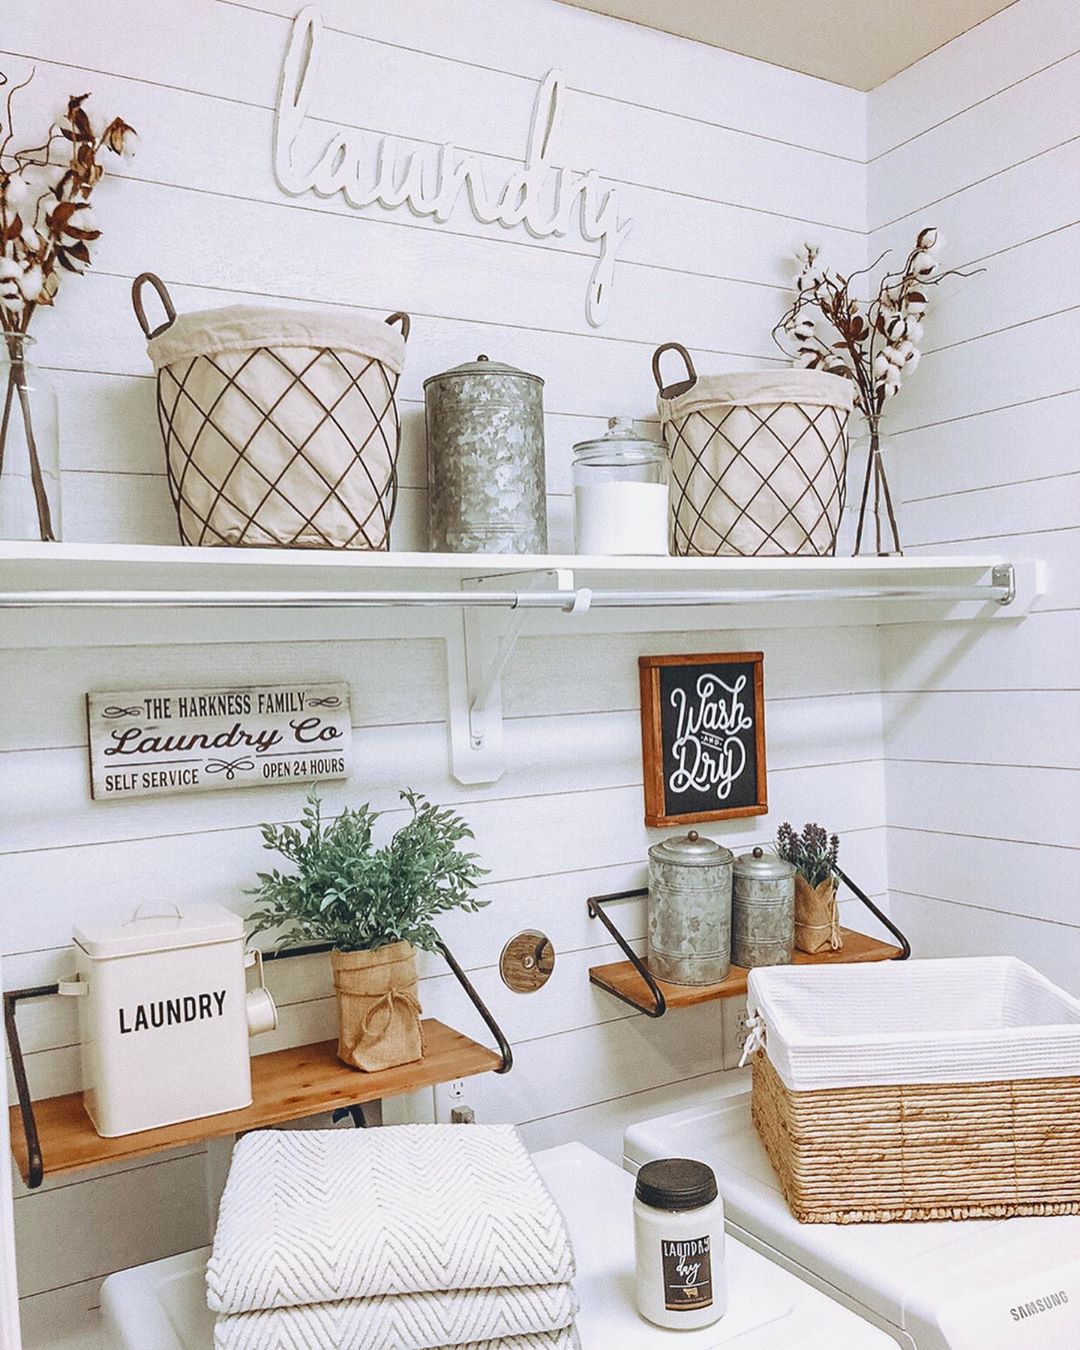 Laundry Room with Shelves for Storage and Supplies on Walls. Photo by Instagram user @harknesshomestylist